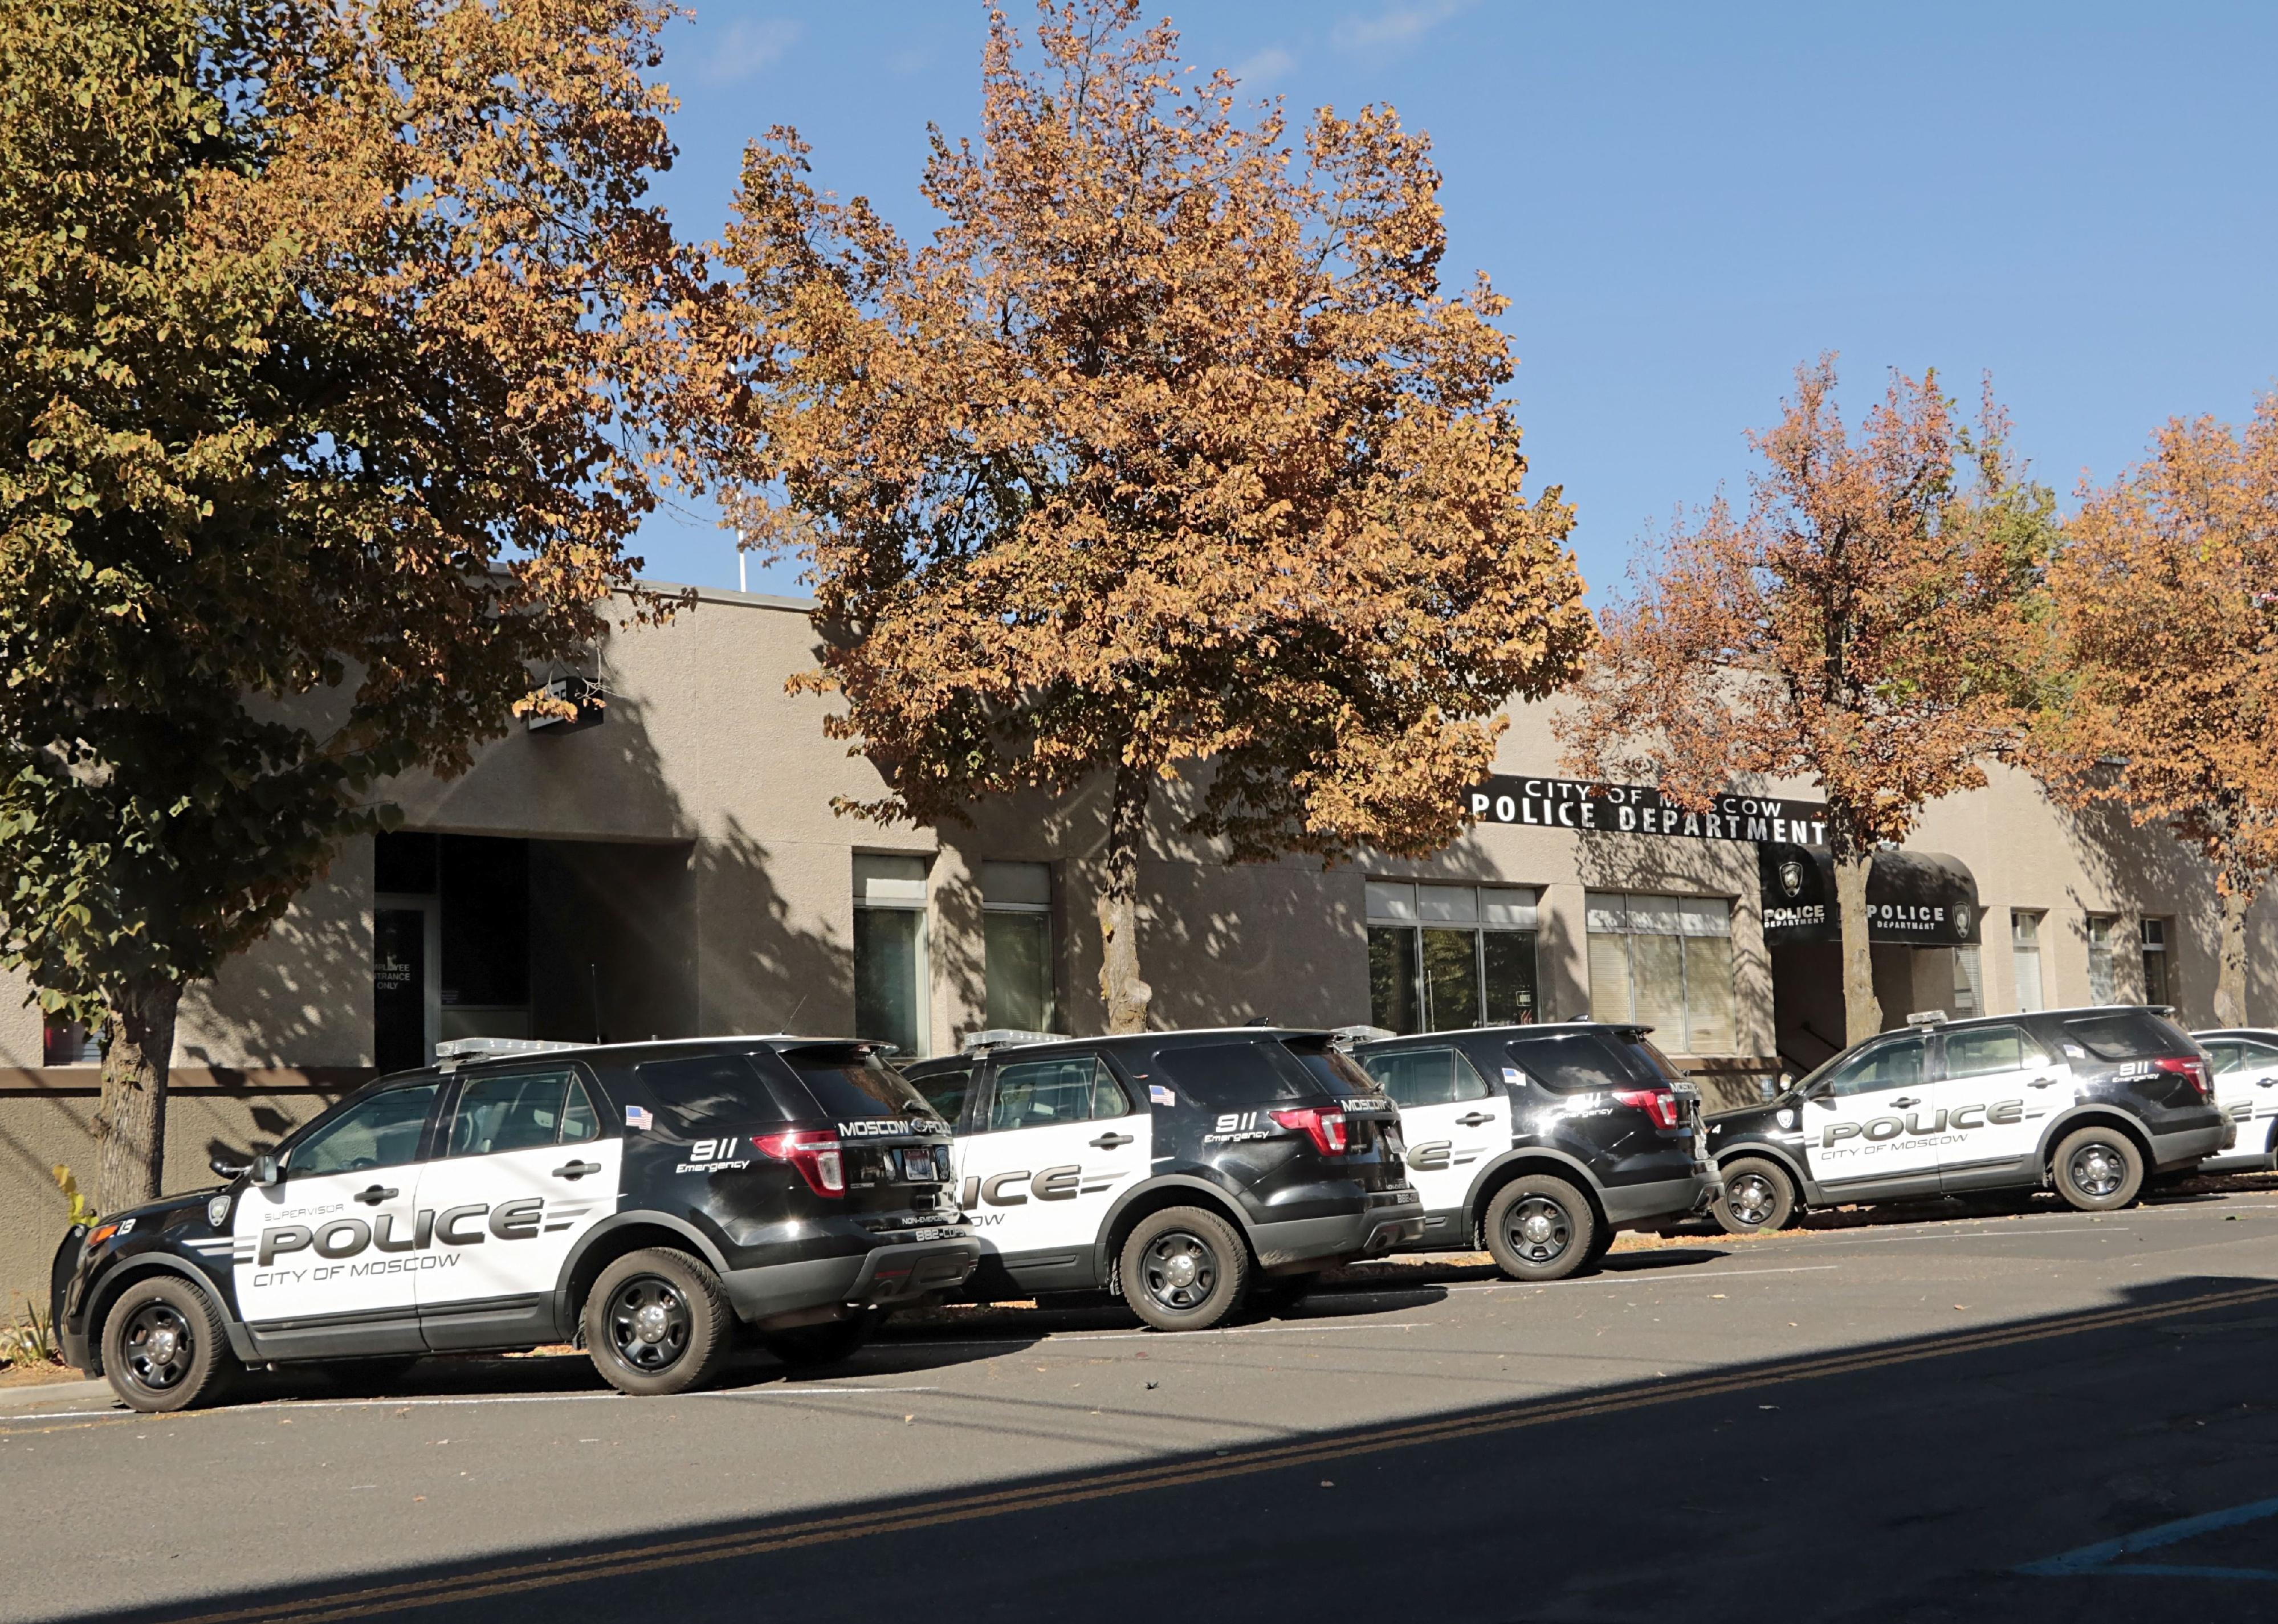 Moscow Idaho Police Department building downtown. 